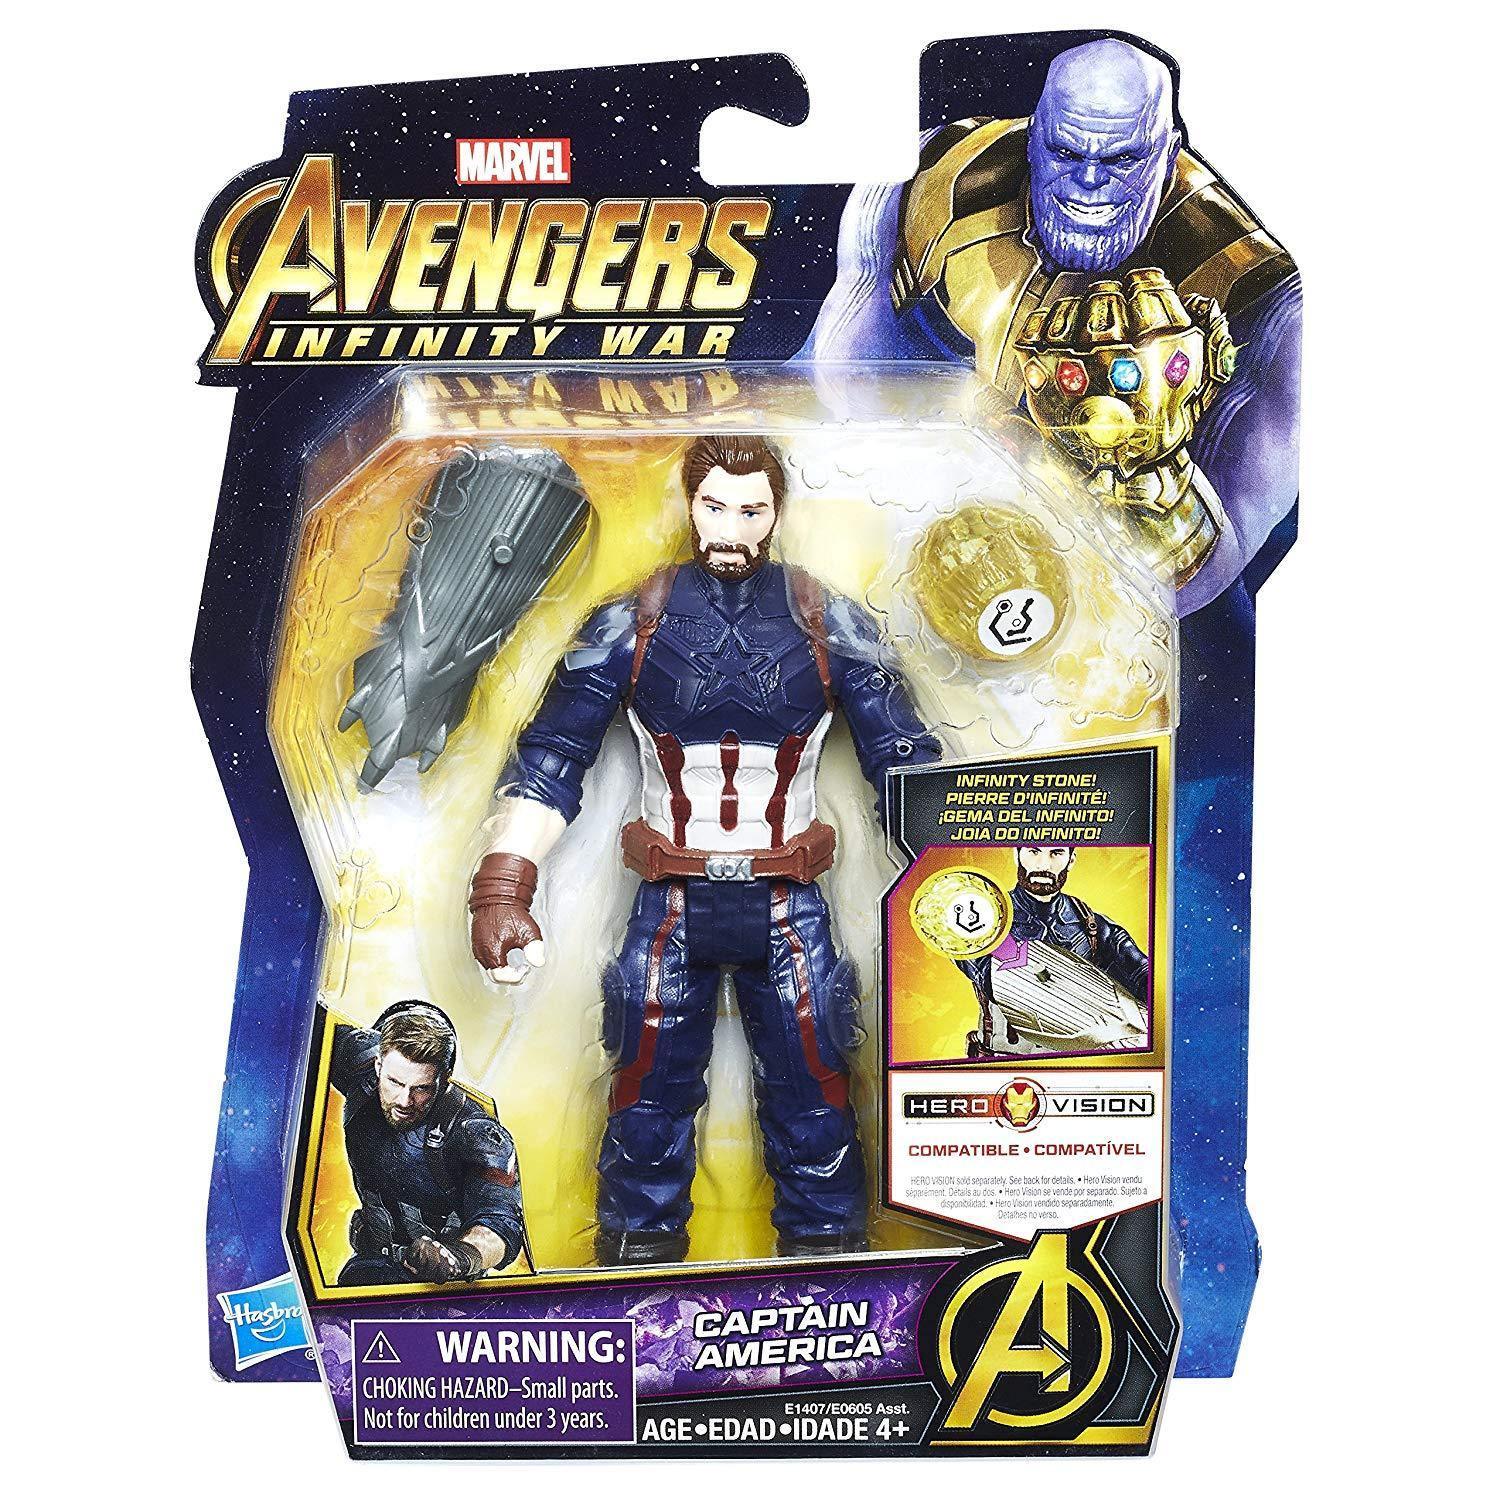 Marvel Avengers Infinity War Captain America with Infinity Stone - BumbleToys - 5-7 Years, Avengers, Boys, Captain America, Figures, Heroes